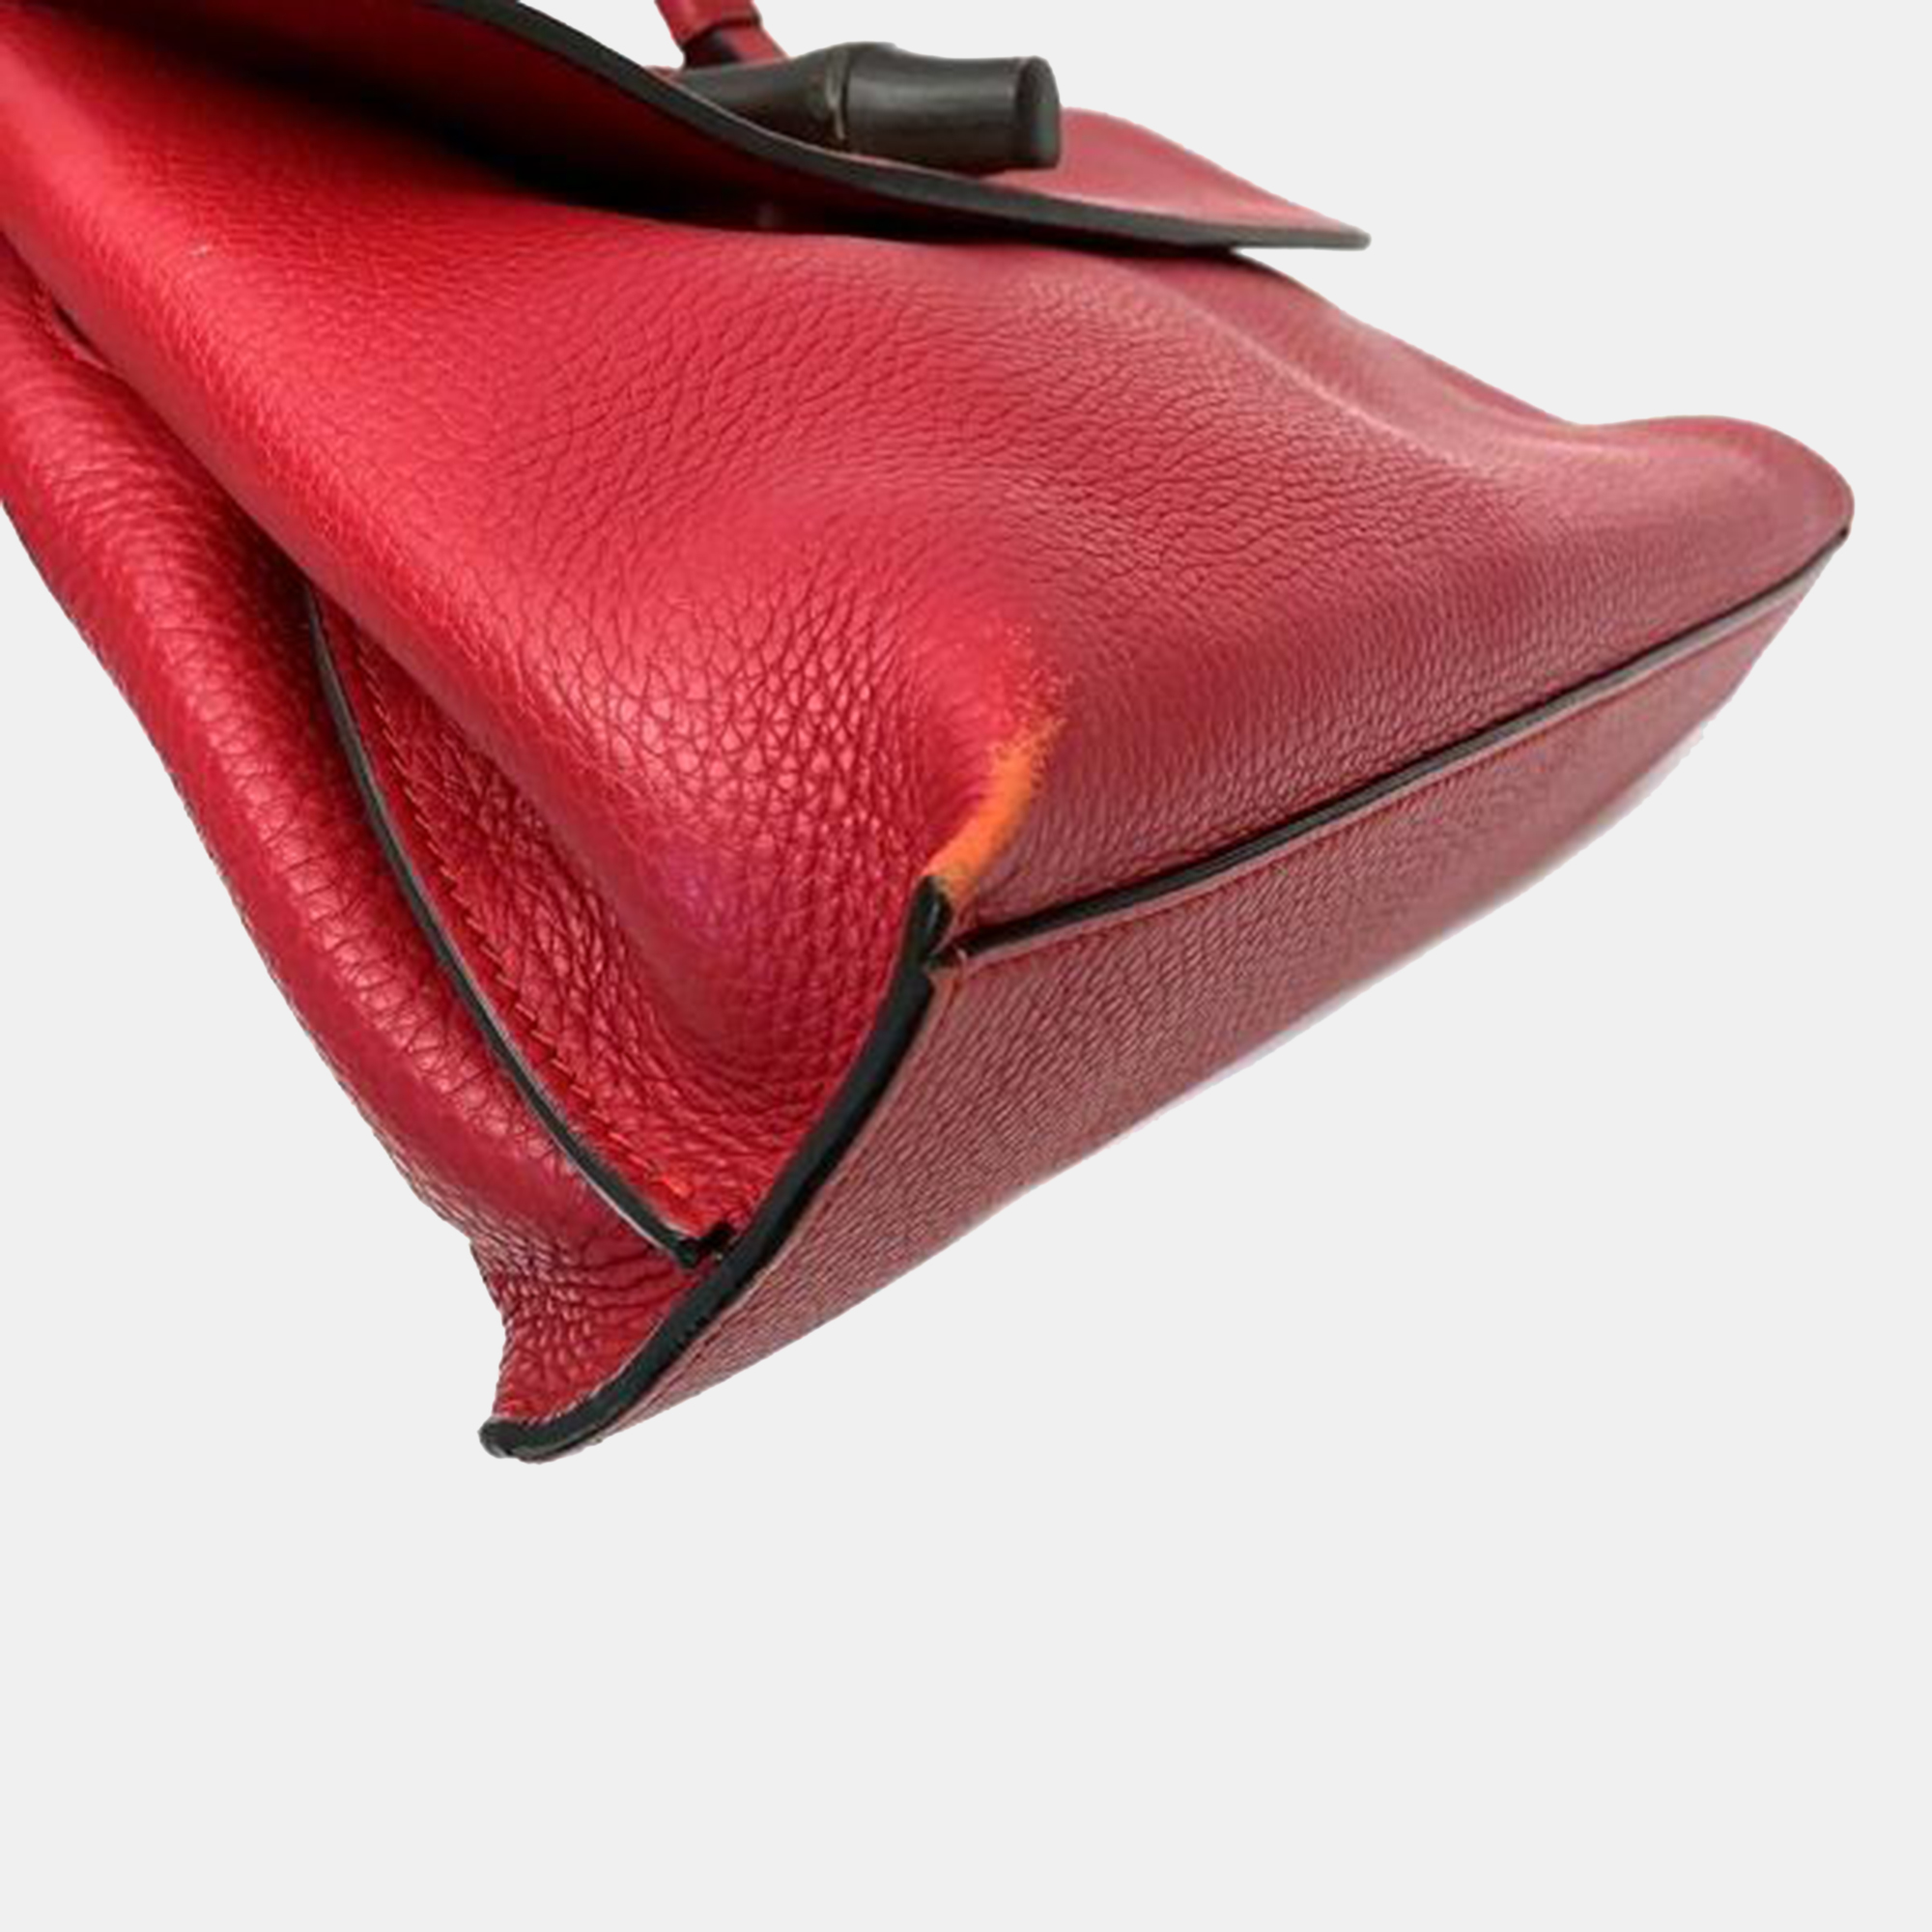 Gucci Red Leather Medium Bamboo Top Handle Bag